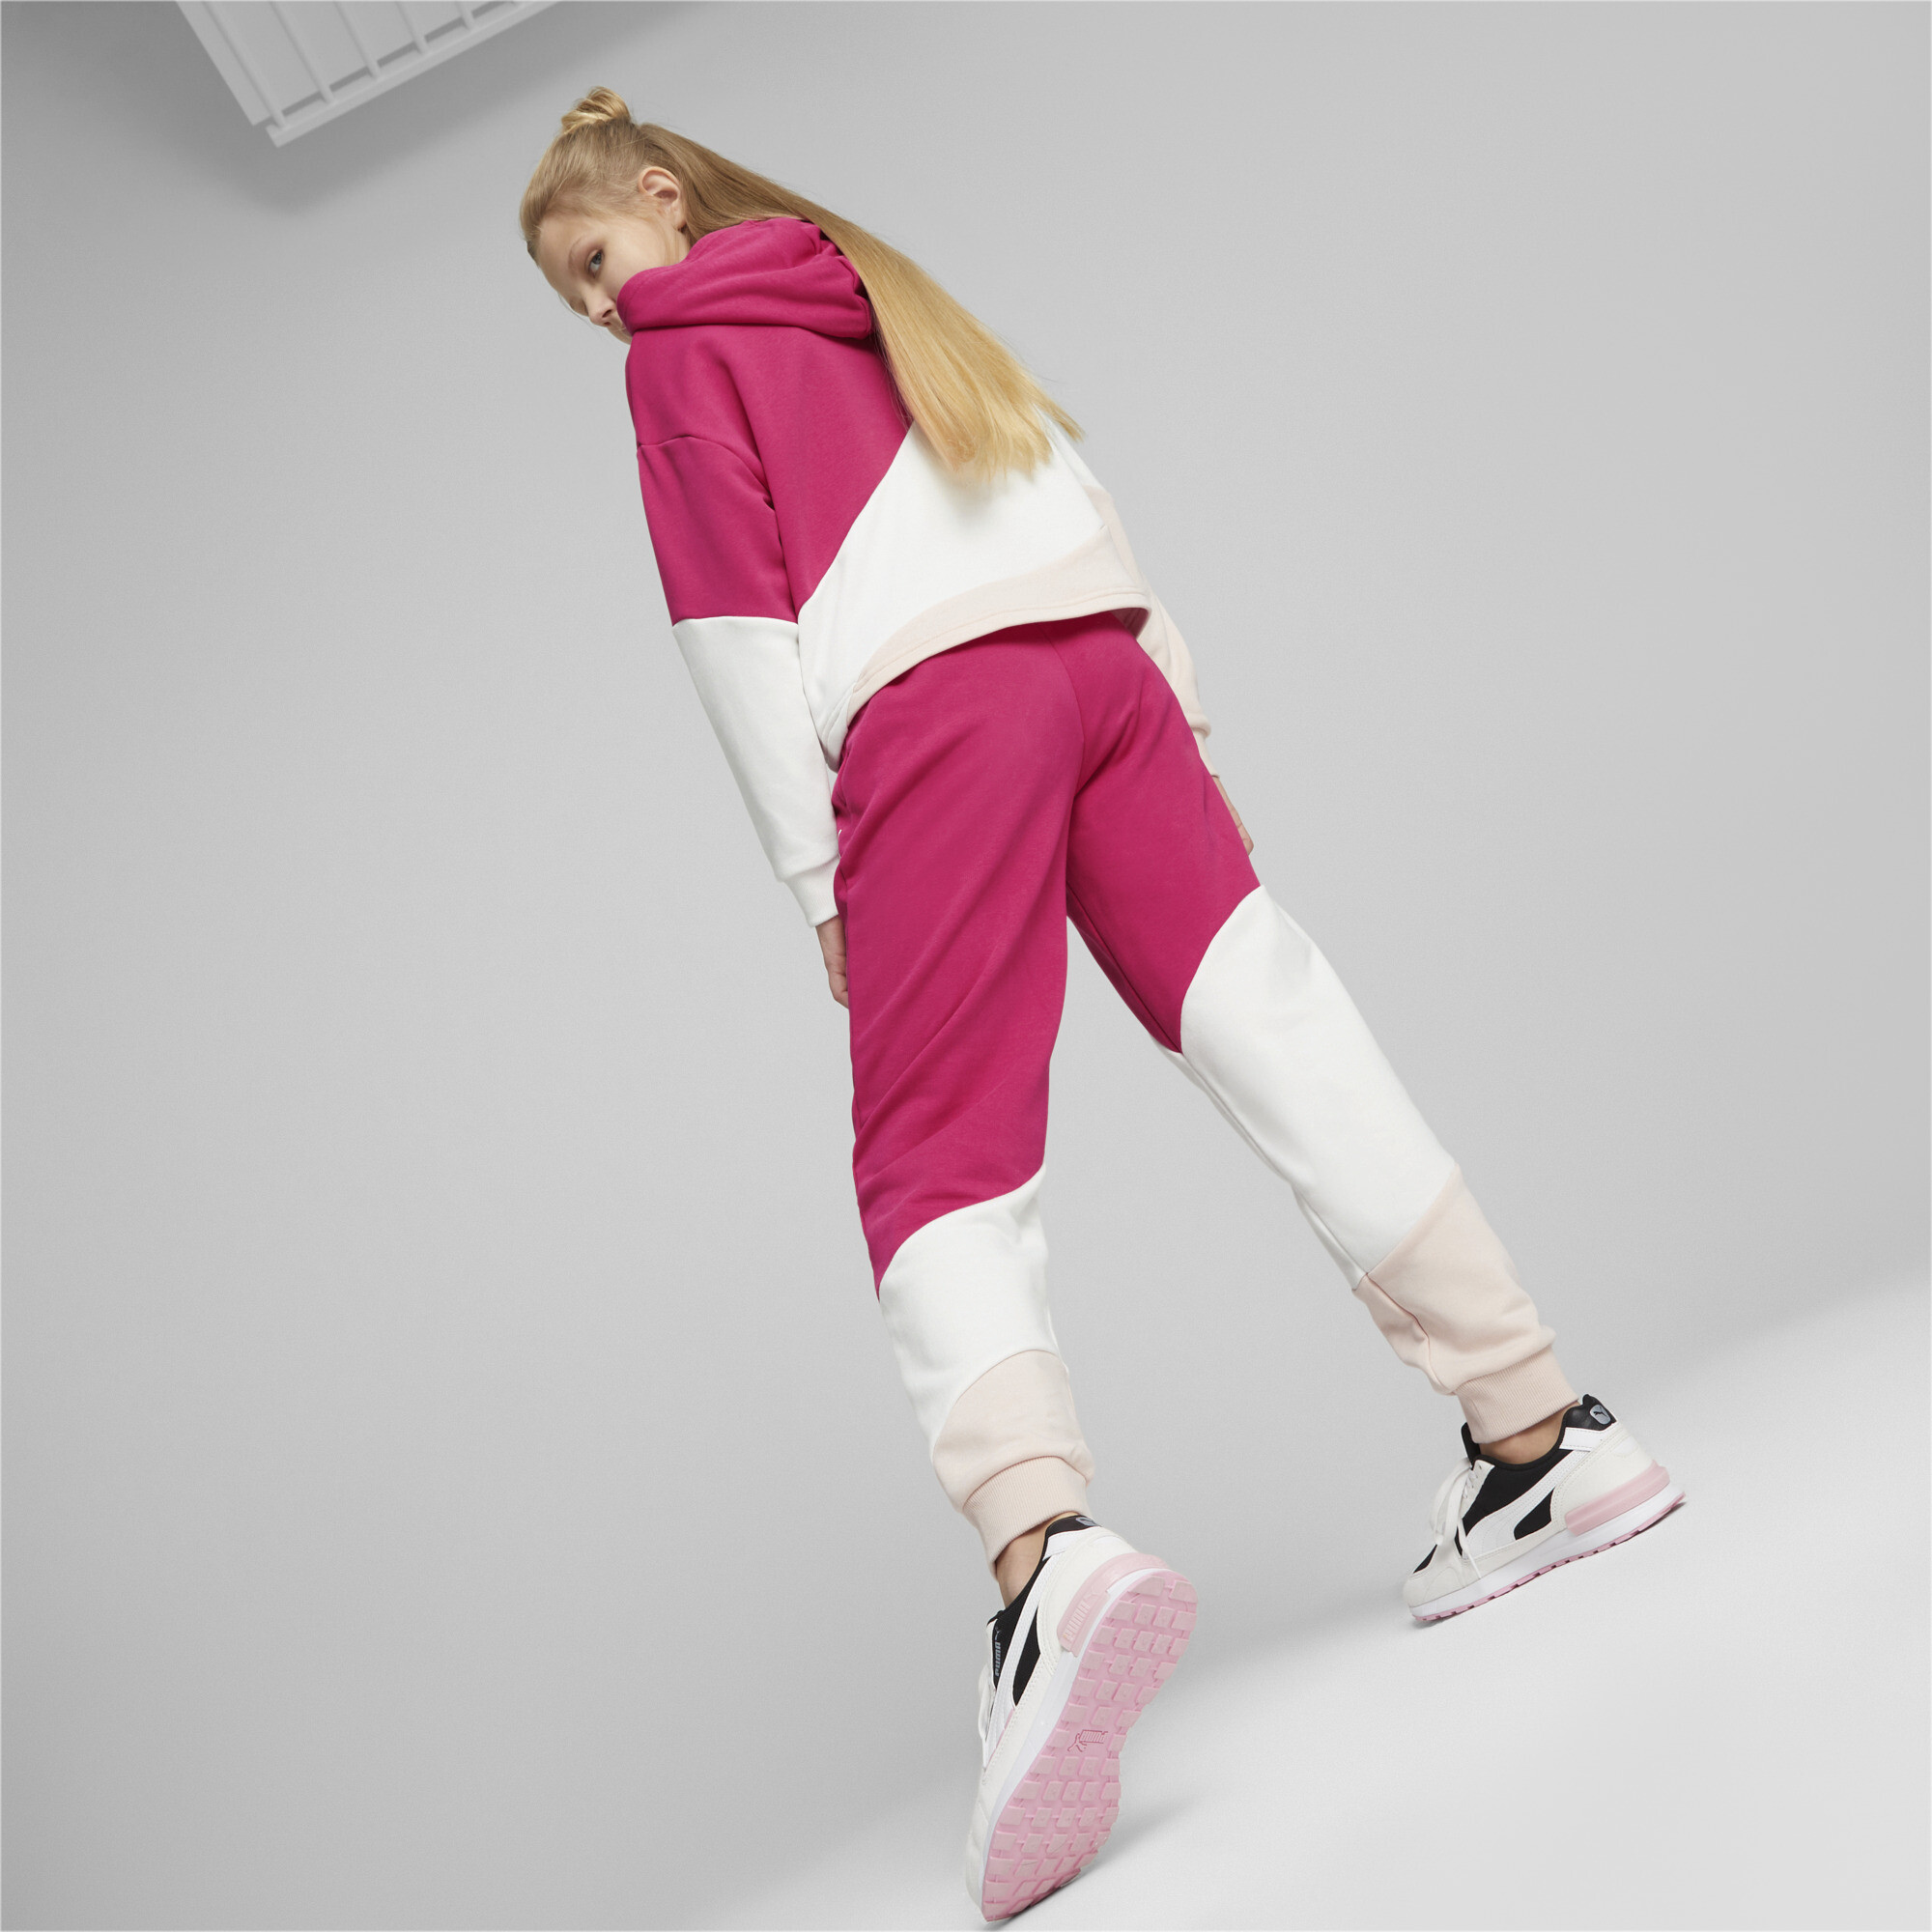 PUMA POWER Cat Pants In Pink, Size 3-4 Youth